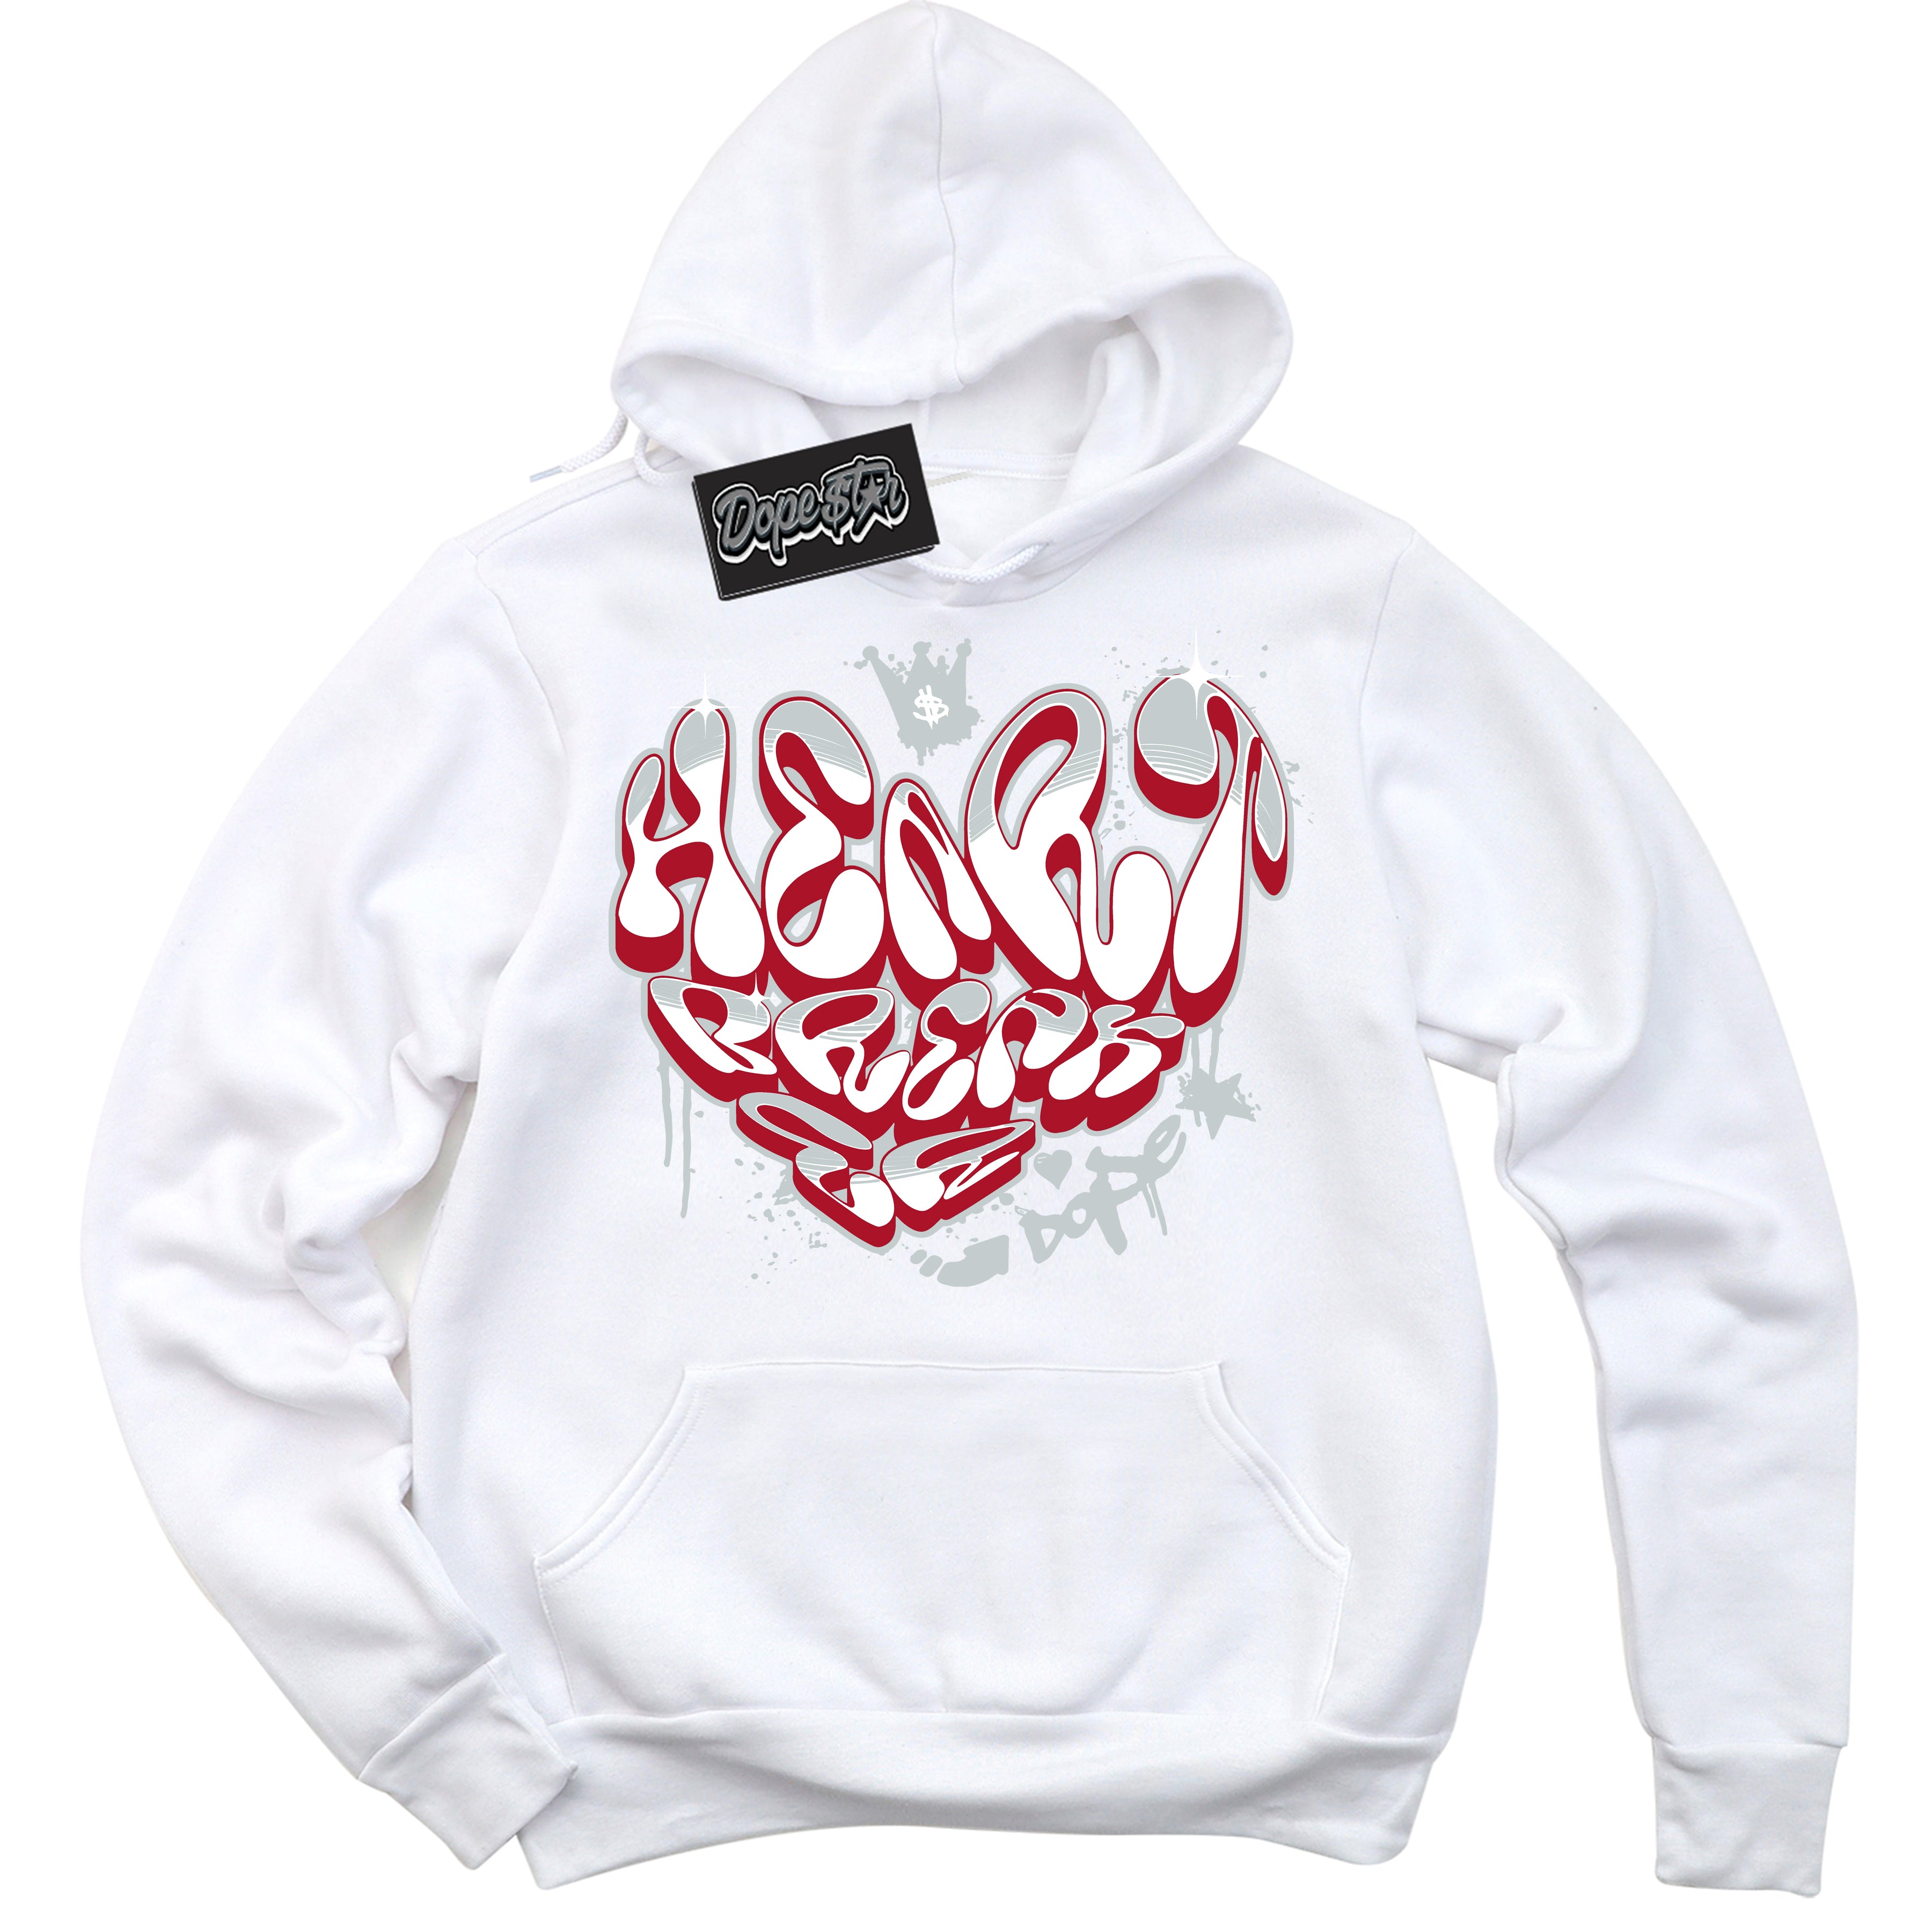 Cool White Hoodie with “ Heartbreaker Graffiti ”  design that Perfectly Matches  Reverse Ultraman Sneakers.